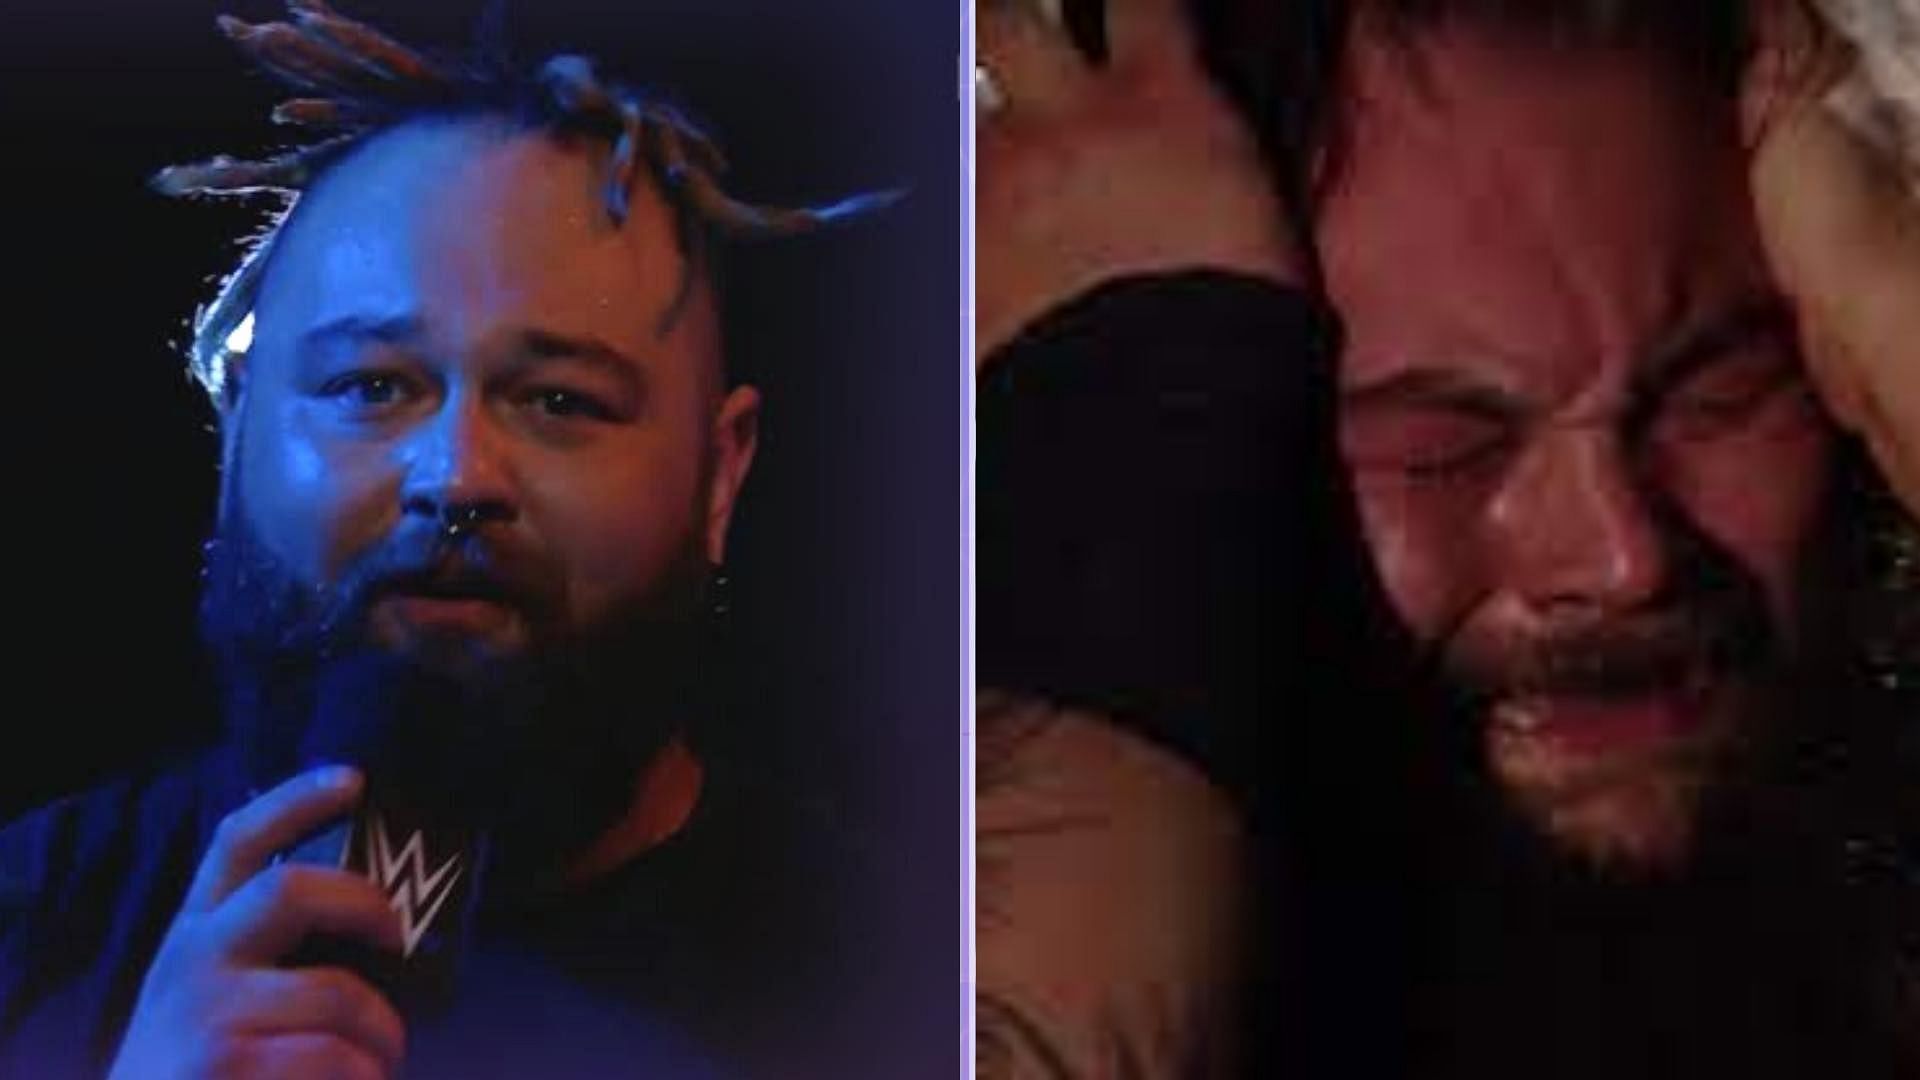 Bray Wyatt has not had the best time in WWE